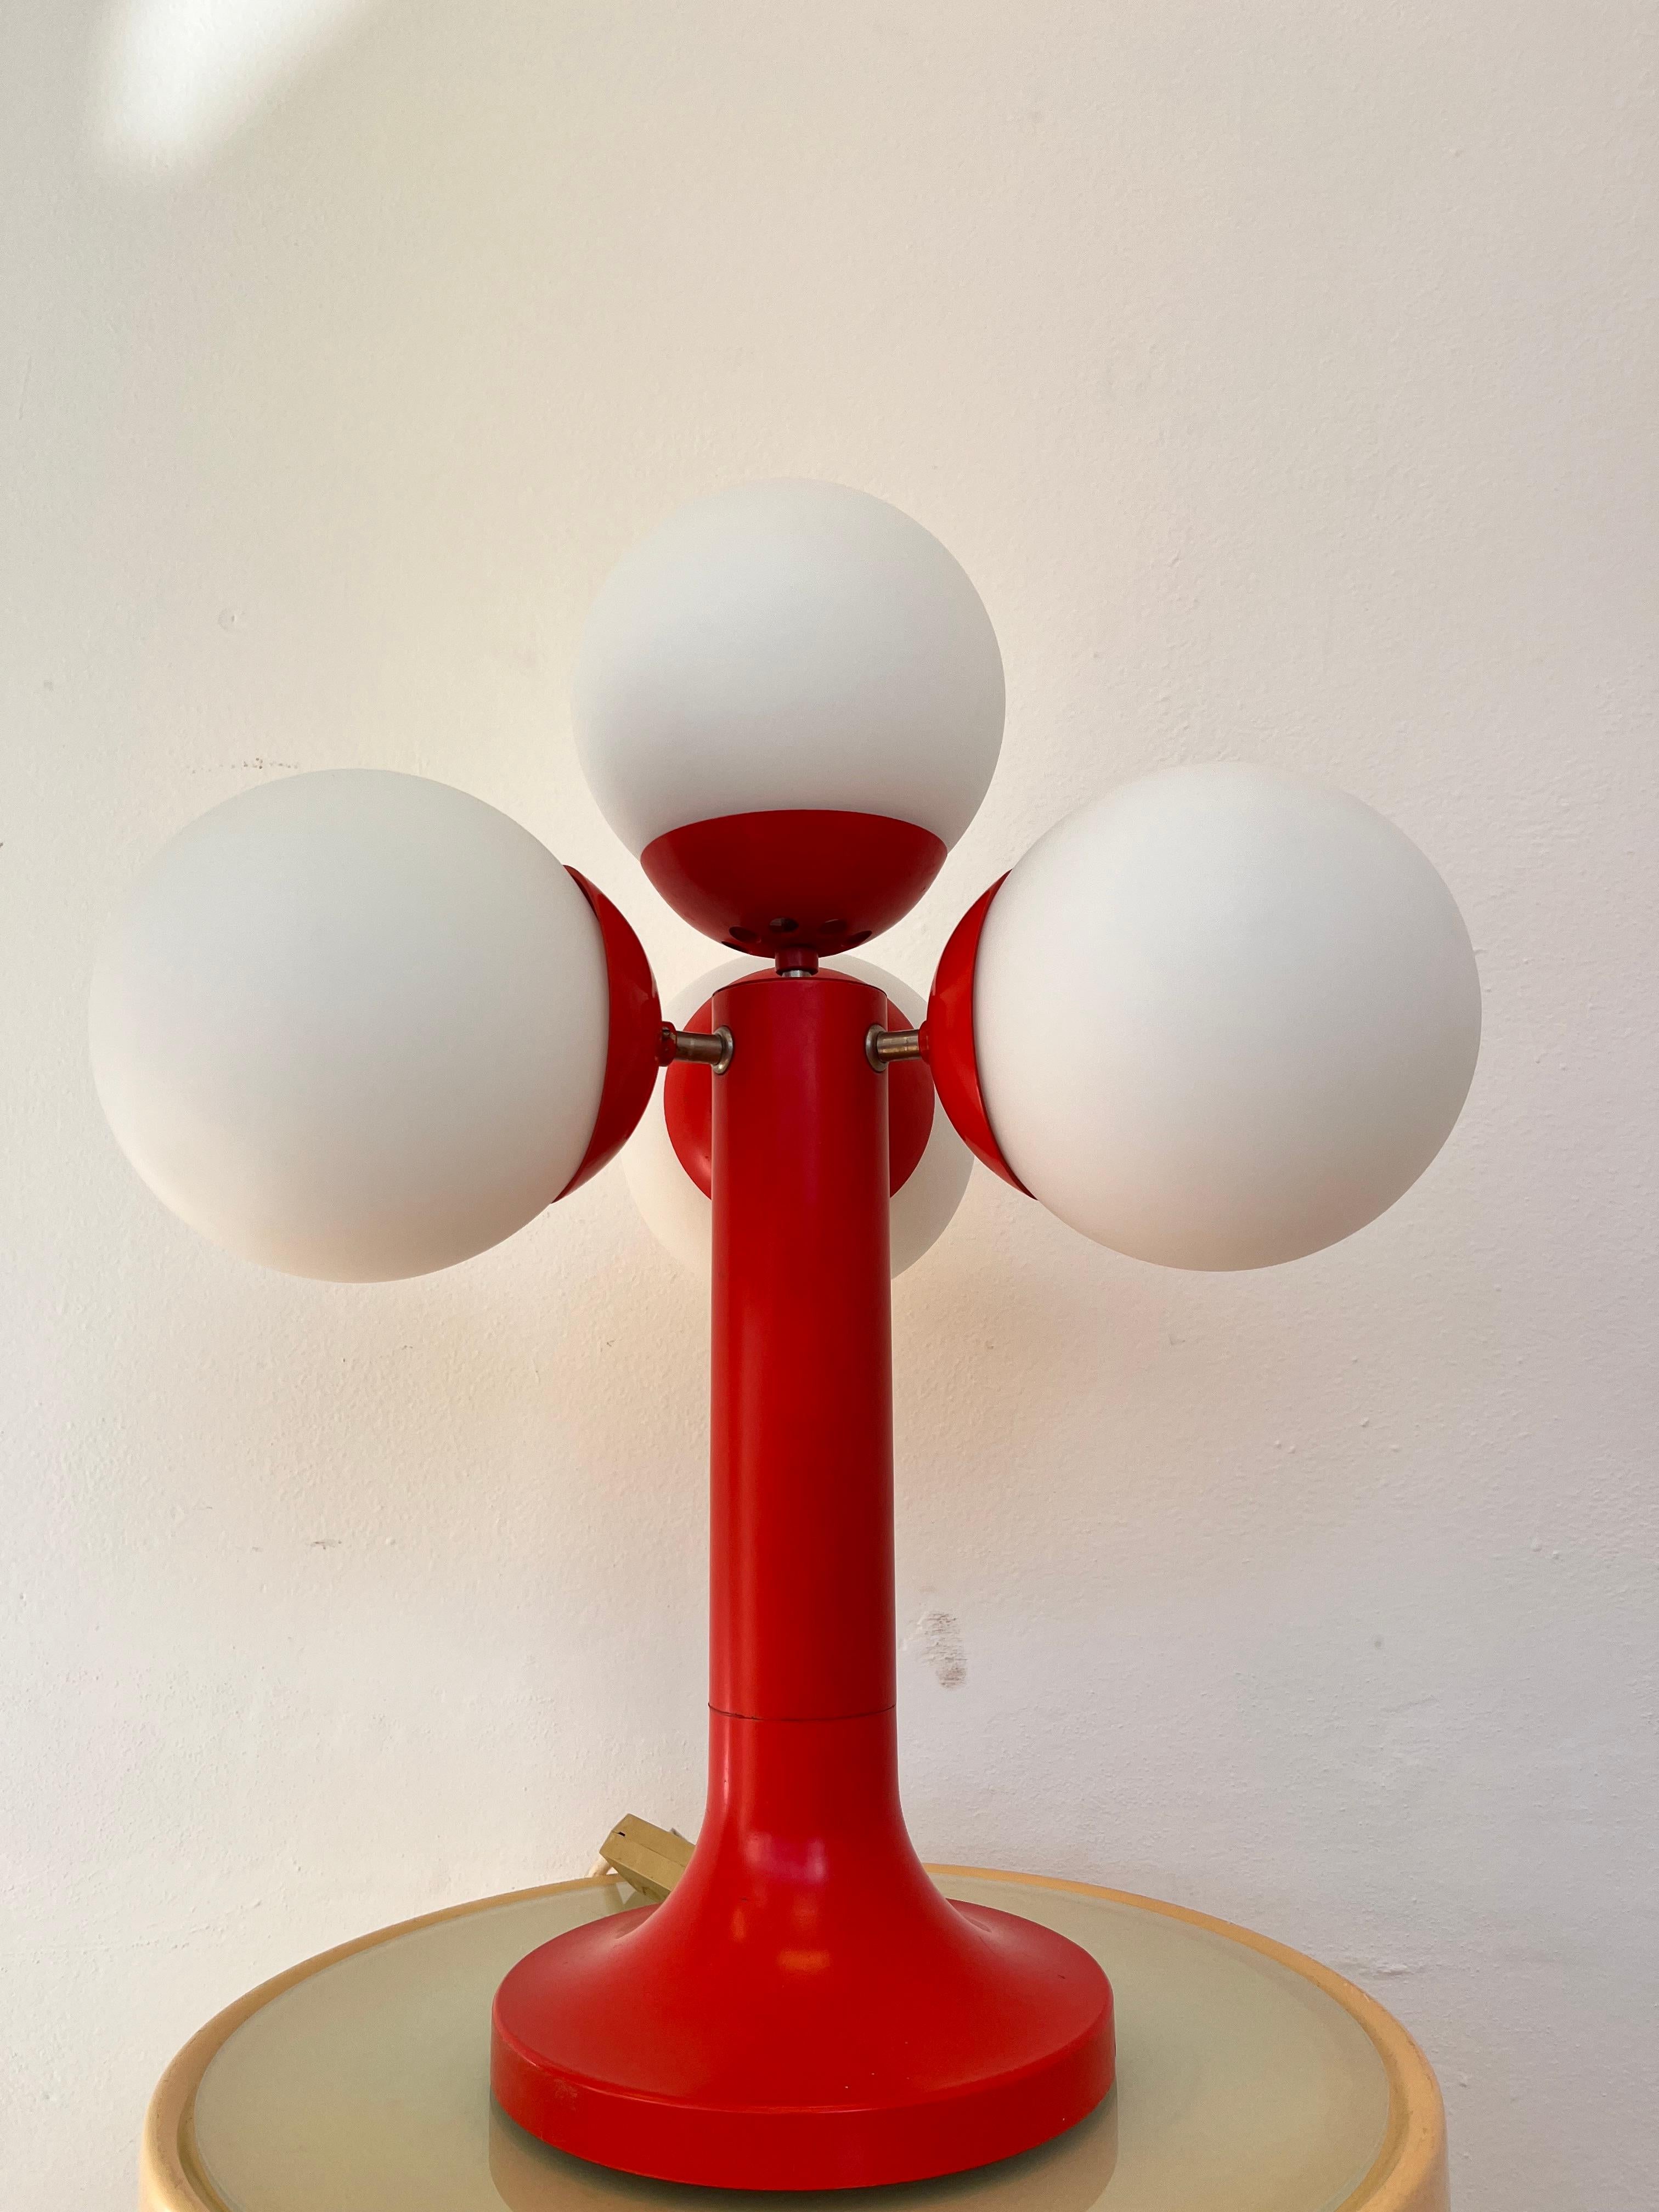 XL Midcentury Space Age Table Lamp, Sputnik or Atom, 1970s - Germany For Sale 1